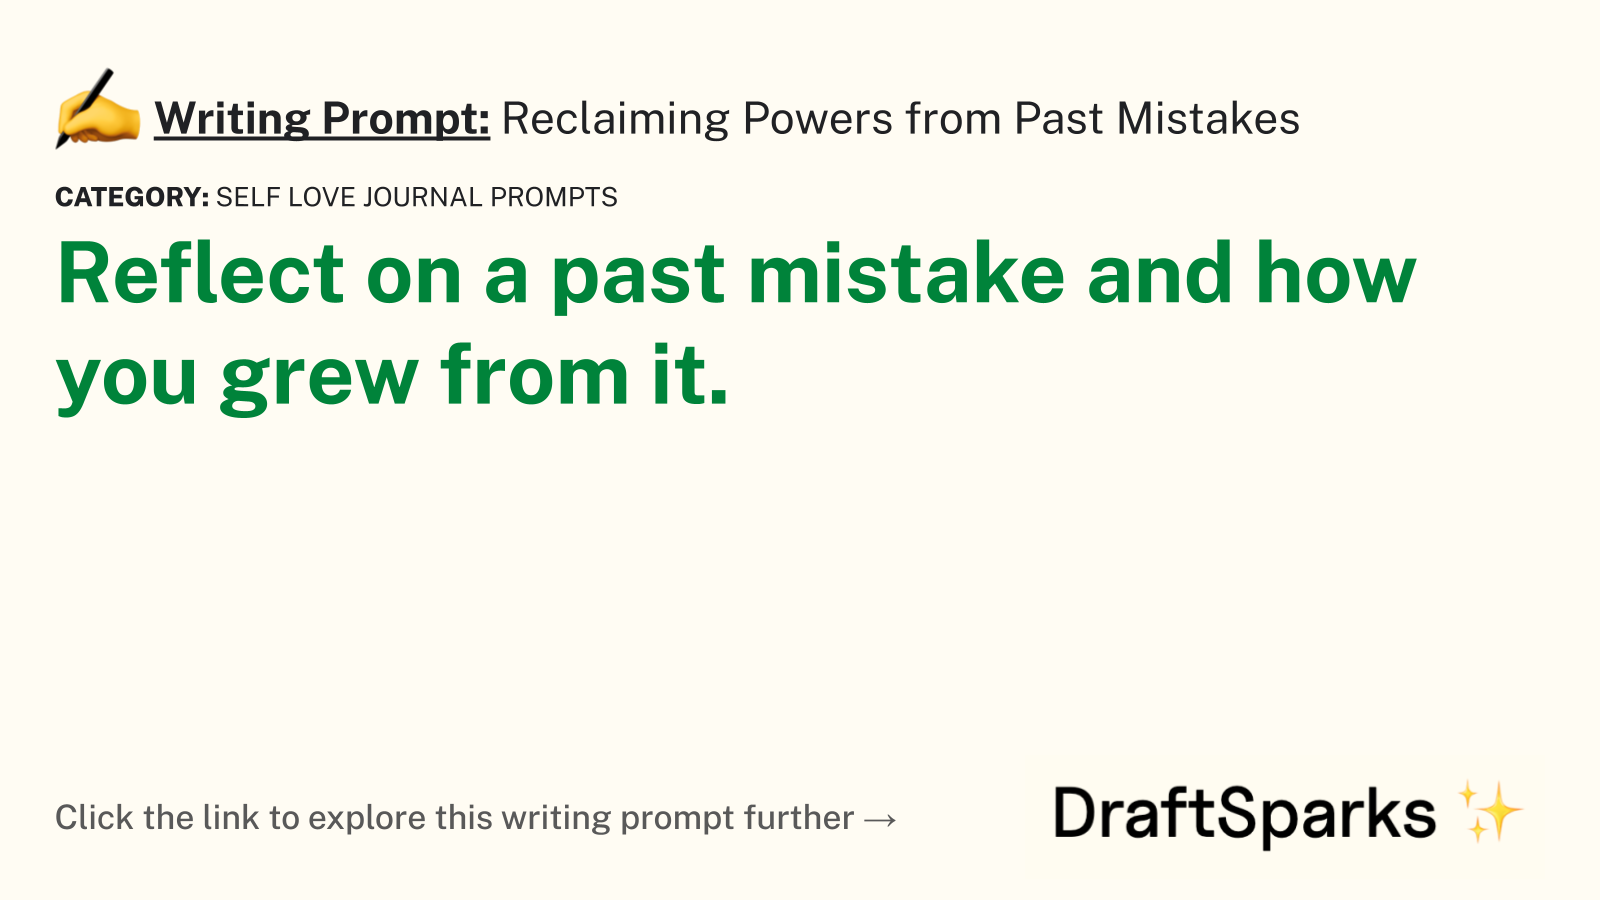 Reclaiming Powers from Past Mistakes